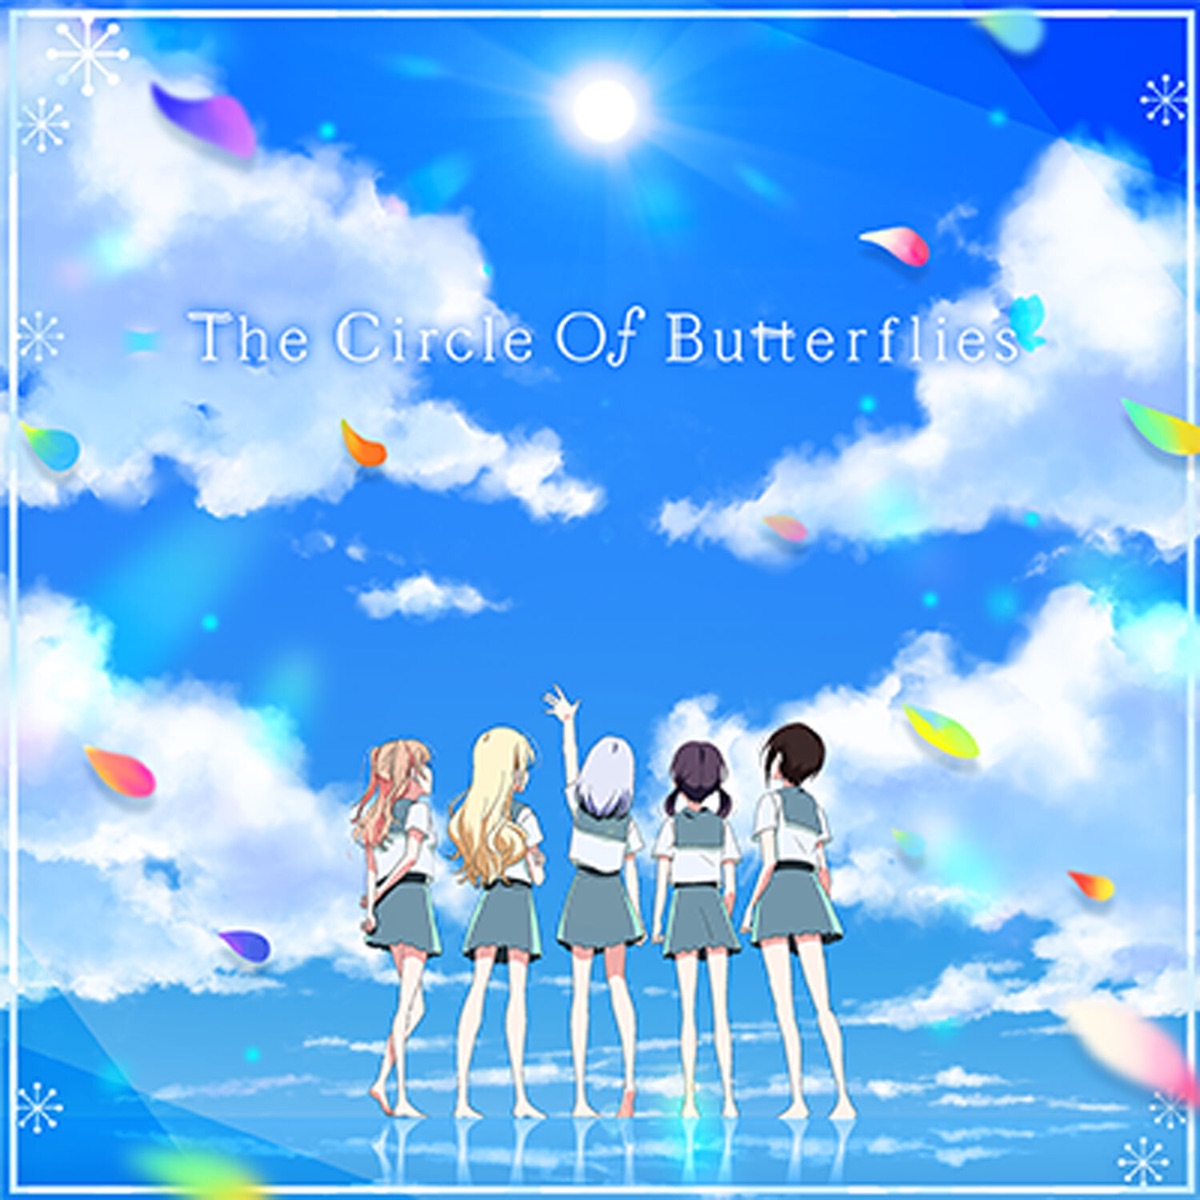 Cover art for『Morfonica - The Circle Of Butterflies』from the release『The Circle Of Butterflies』